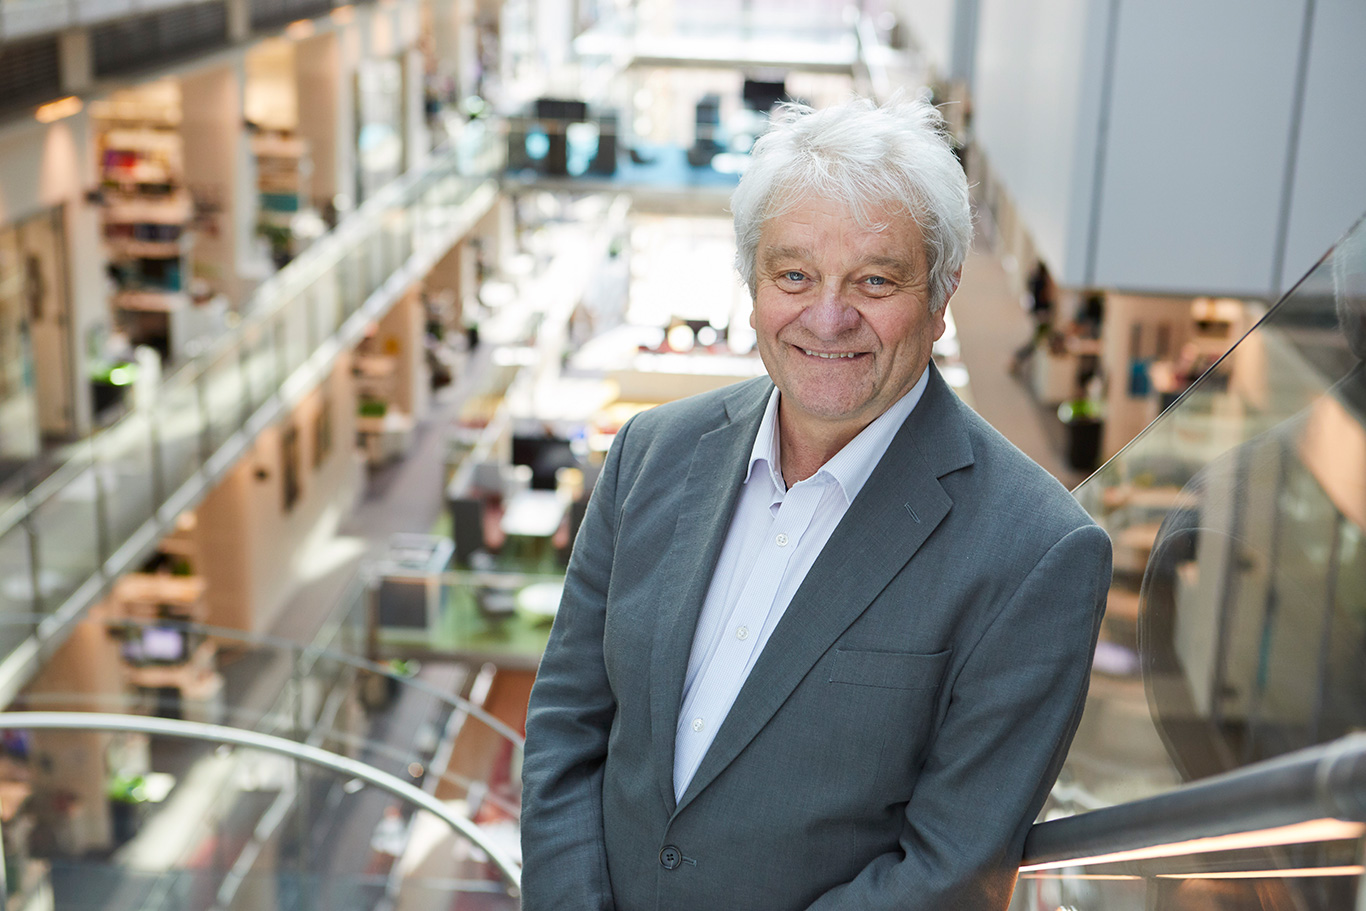 Paul Nurse, gray-haired caucasian male, smiling with a facility in the background